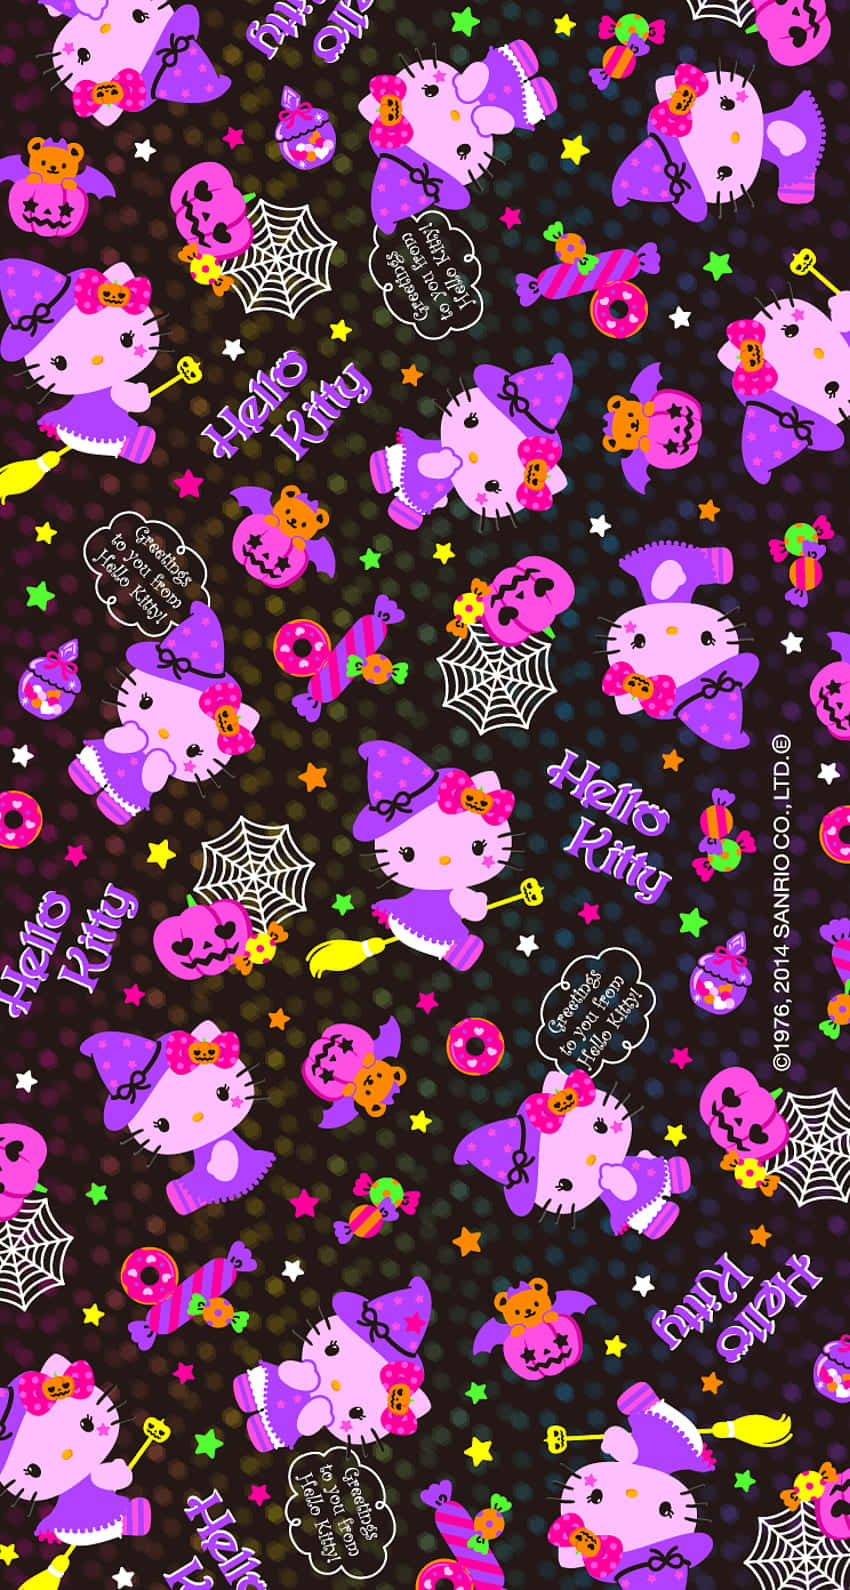 "Be Yourself - Express Your Emotions with Emo Hello Kitty" Wallpaper